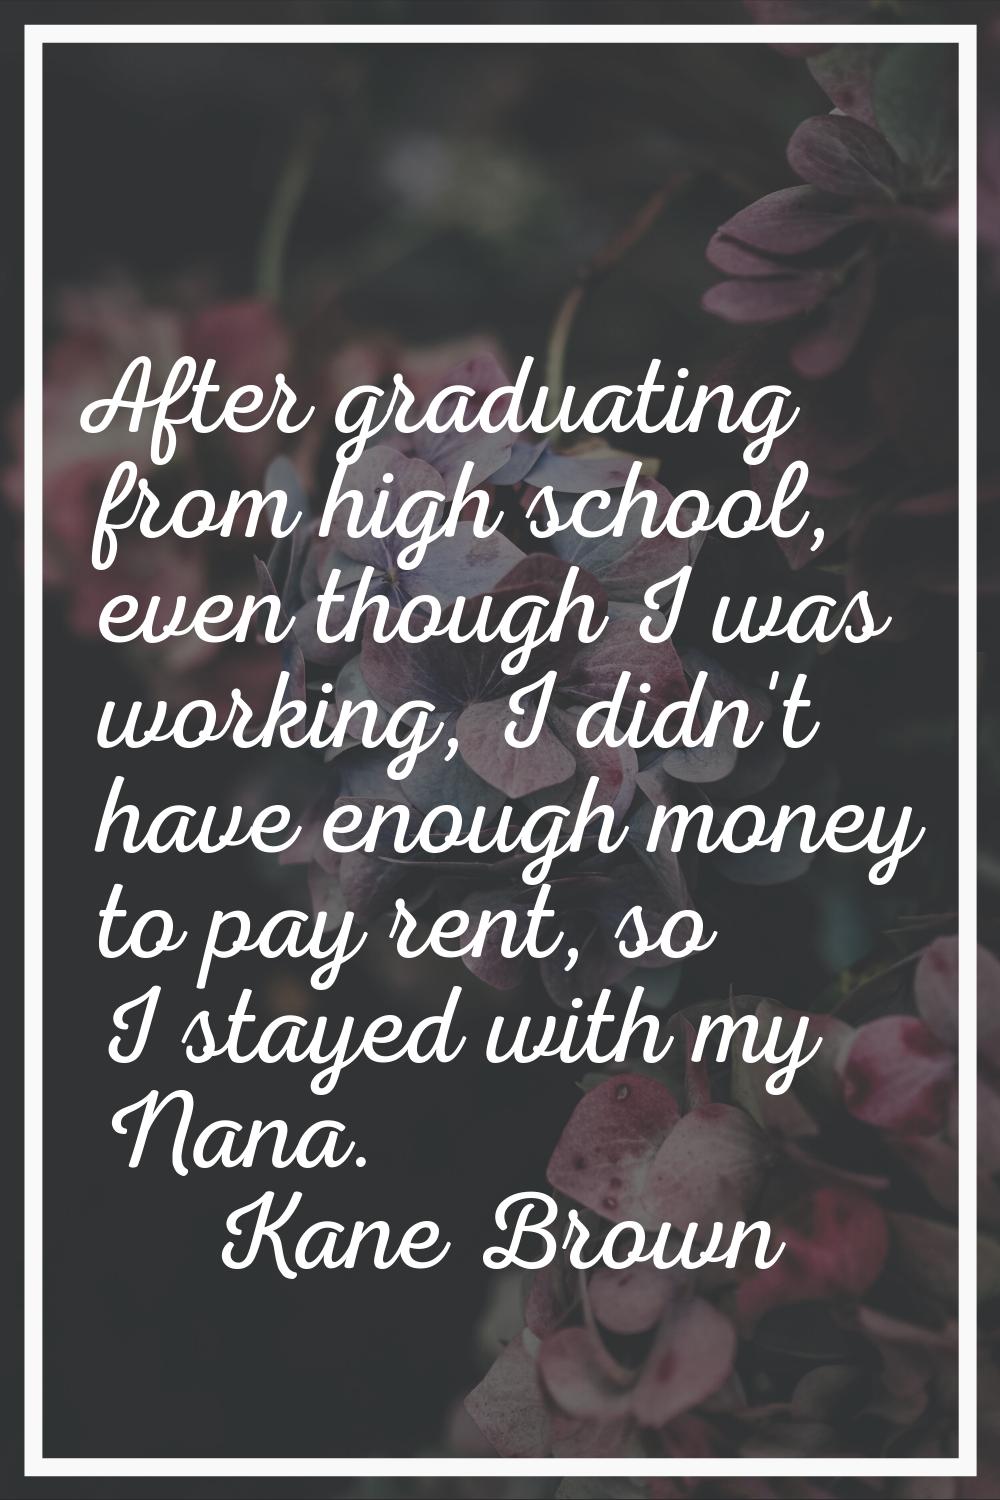 After graduating from high school, even though I was working, I didn't have enough money to pay ren